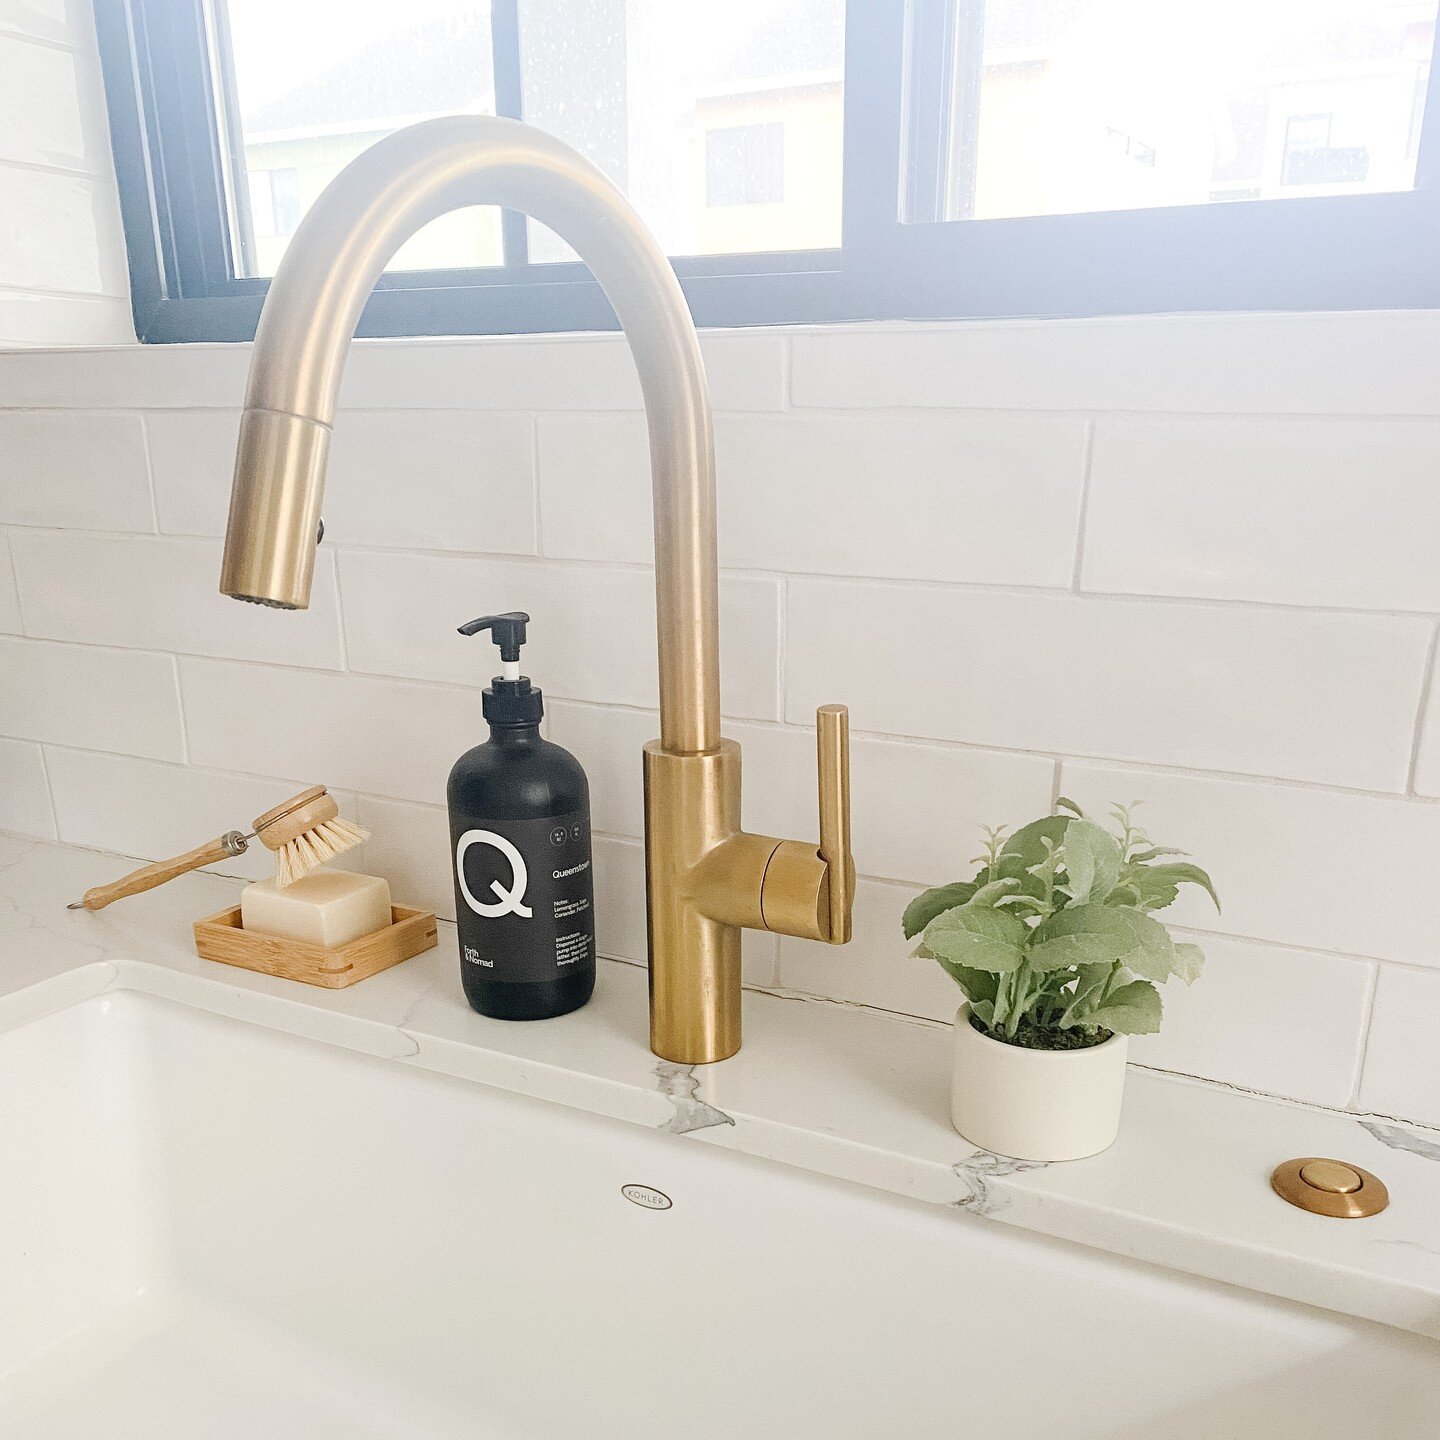 Want to dress up your kitchen sink? Add some greenery, a cute soap, and an organic dish soap bar and brush to bring your kitchen sink look together!

Dish soap: @forthandnomad 
Dish soap bar and brush: @roottohome 
.
.
.
#kitchen #kitchendesign #inte